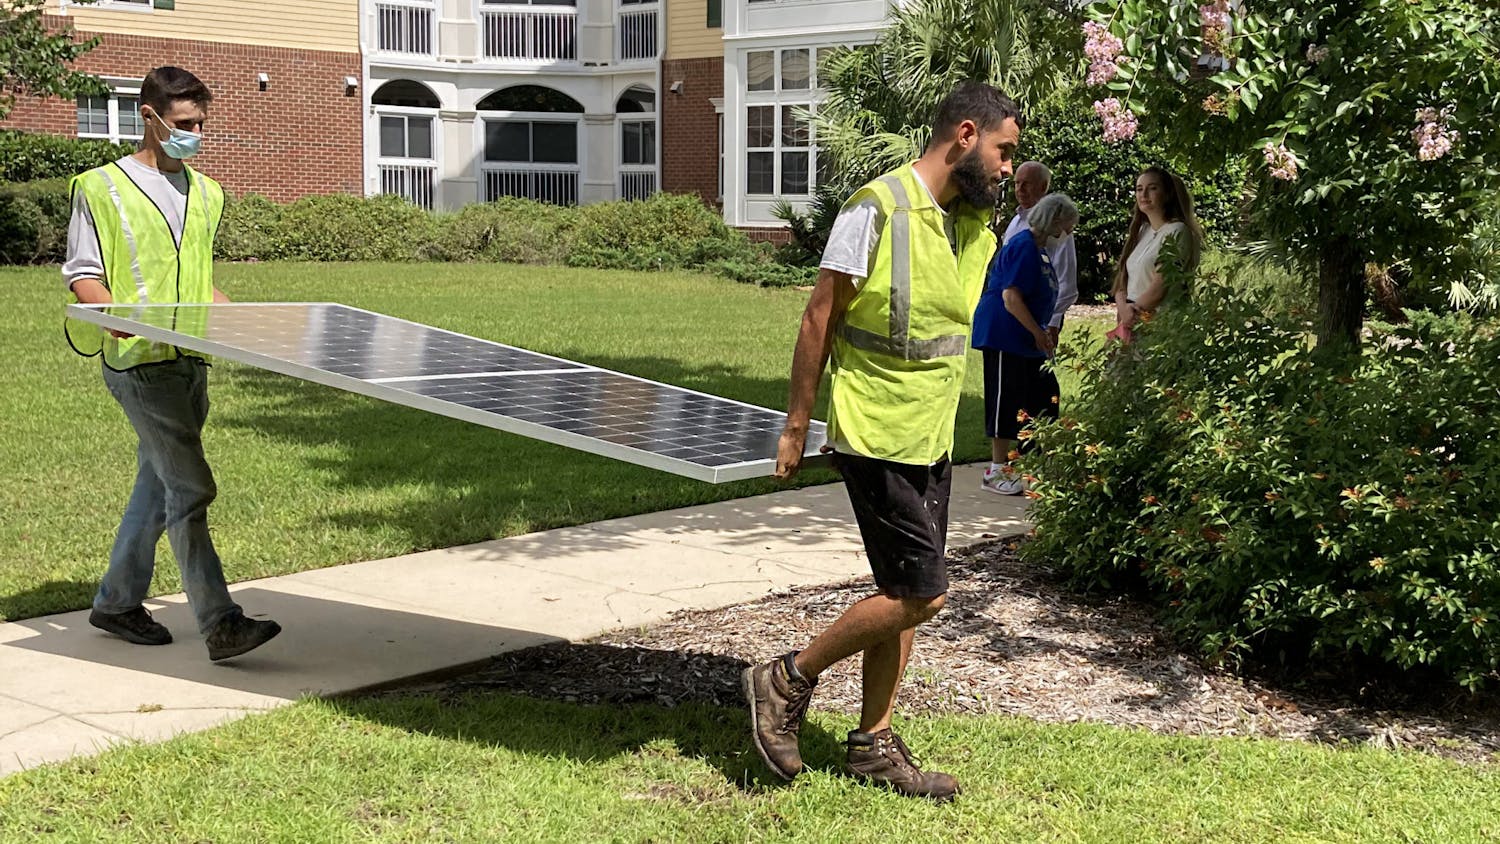 Workers lift up the first solar panel installed on the rooftops of Oak Hammock at the University of Florida on Tuesday, July 20, 2021. 